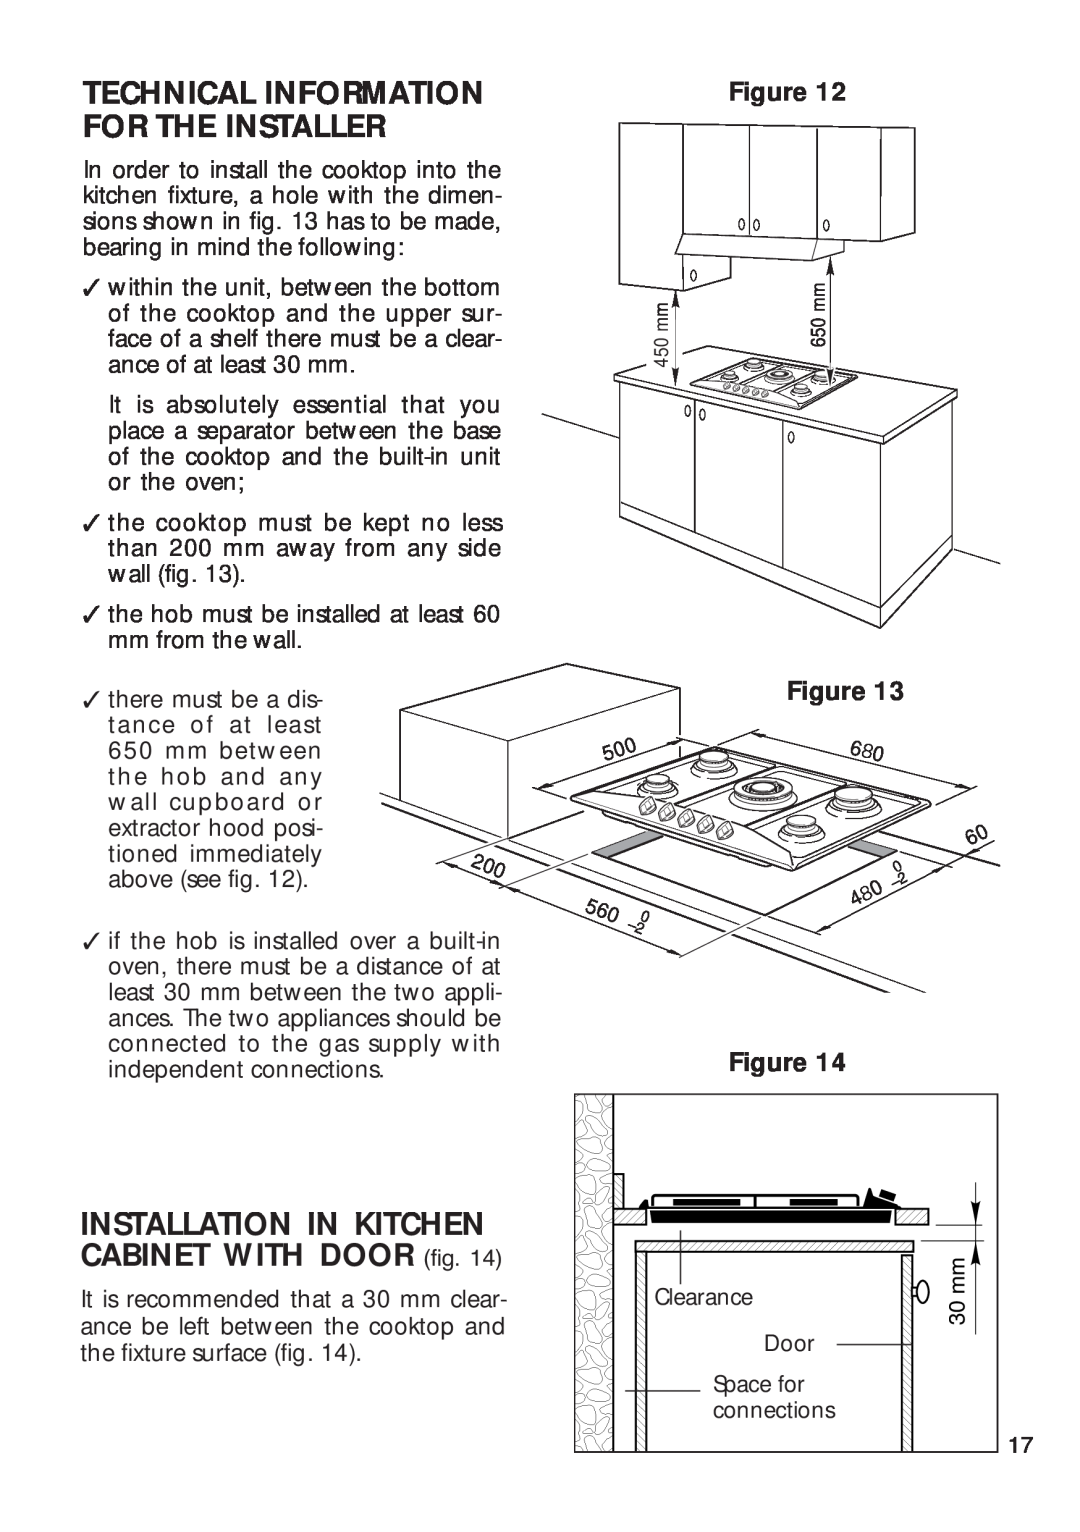 CDA HCG 730, HCG 740 Technical Information For The Installer, INSTALLATION IN KITCHEN CABINET WITH DOOR fig 